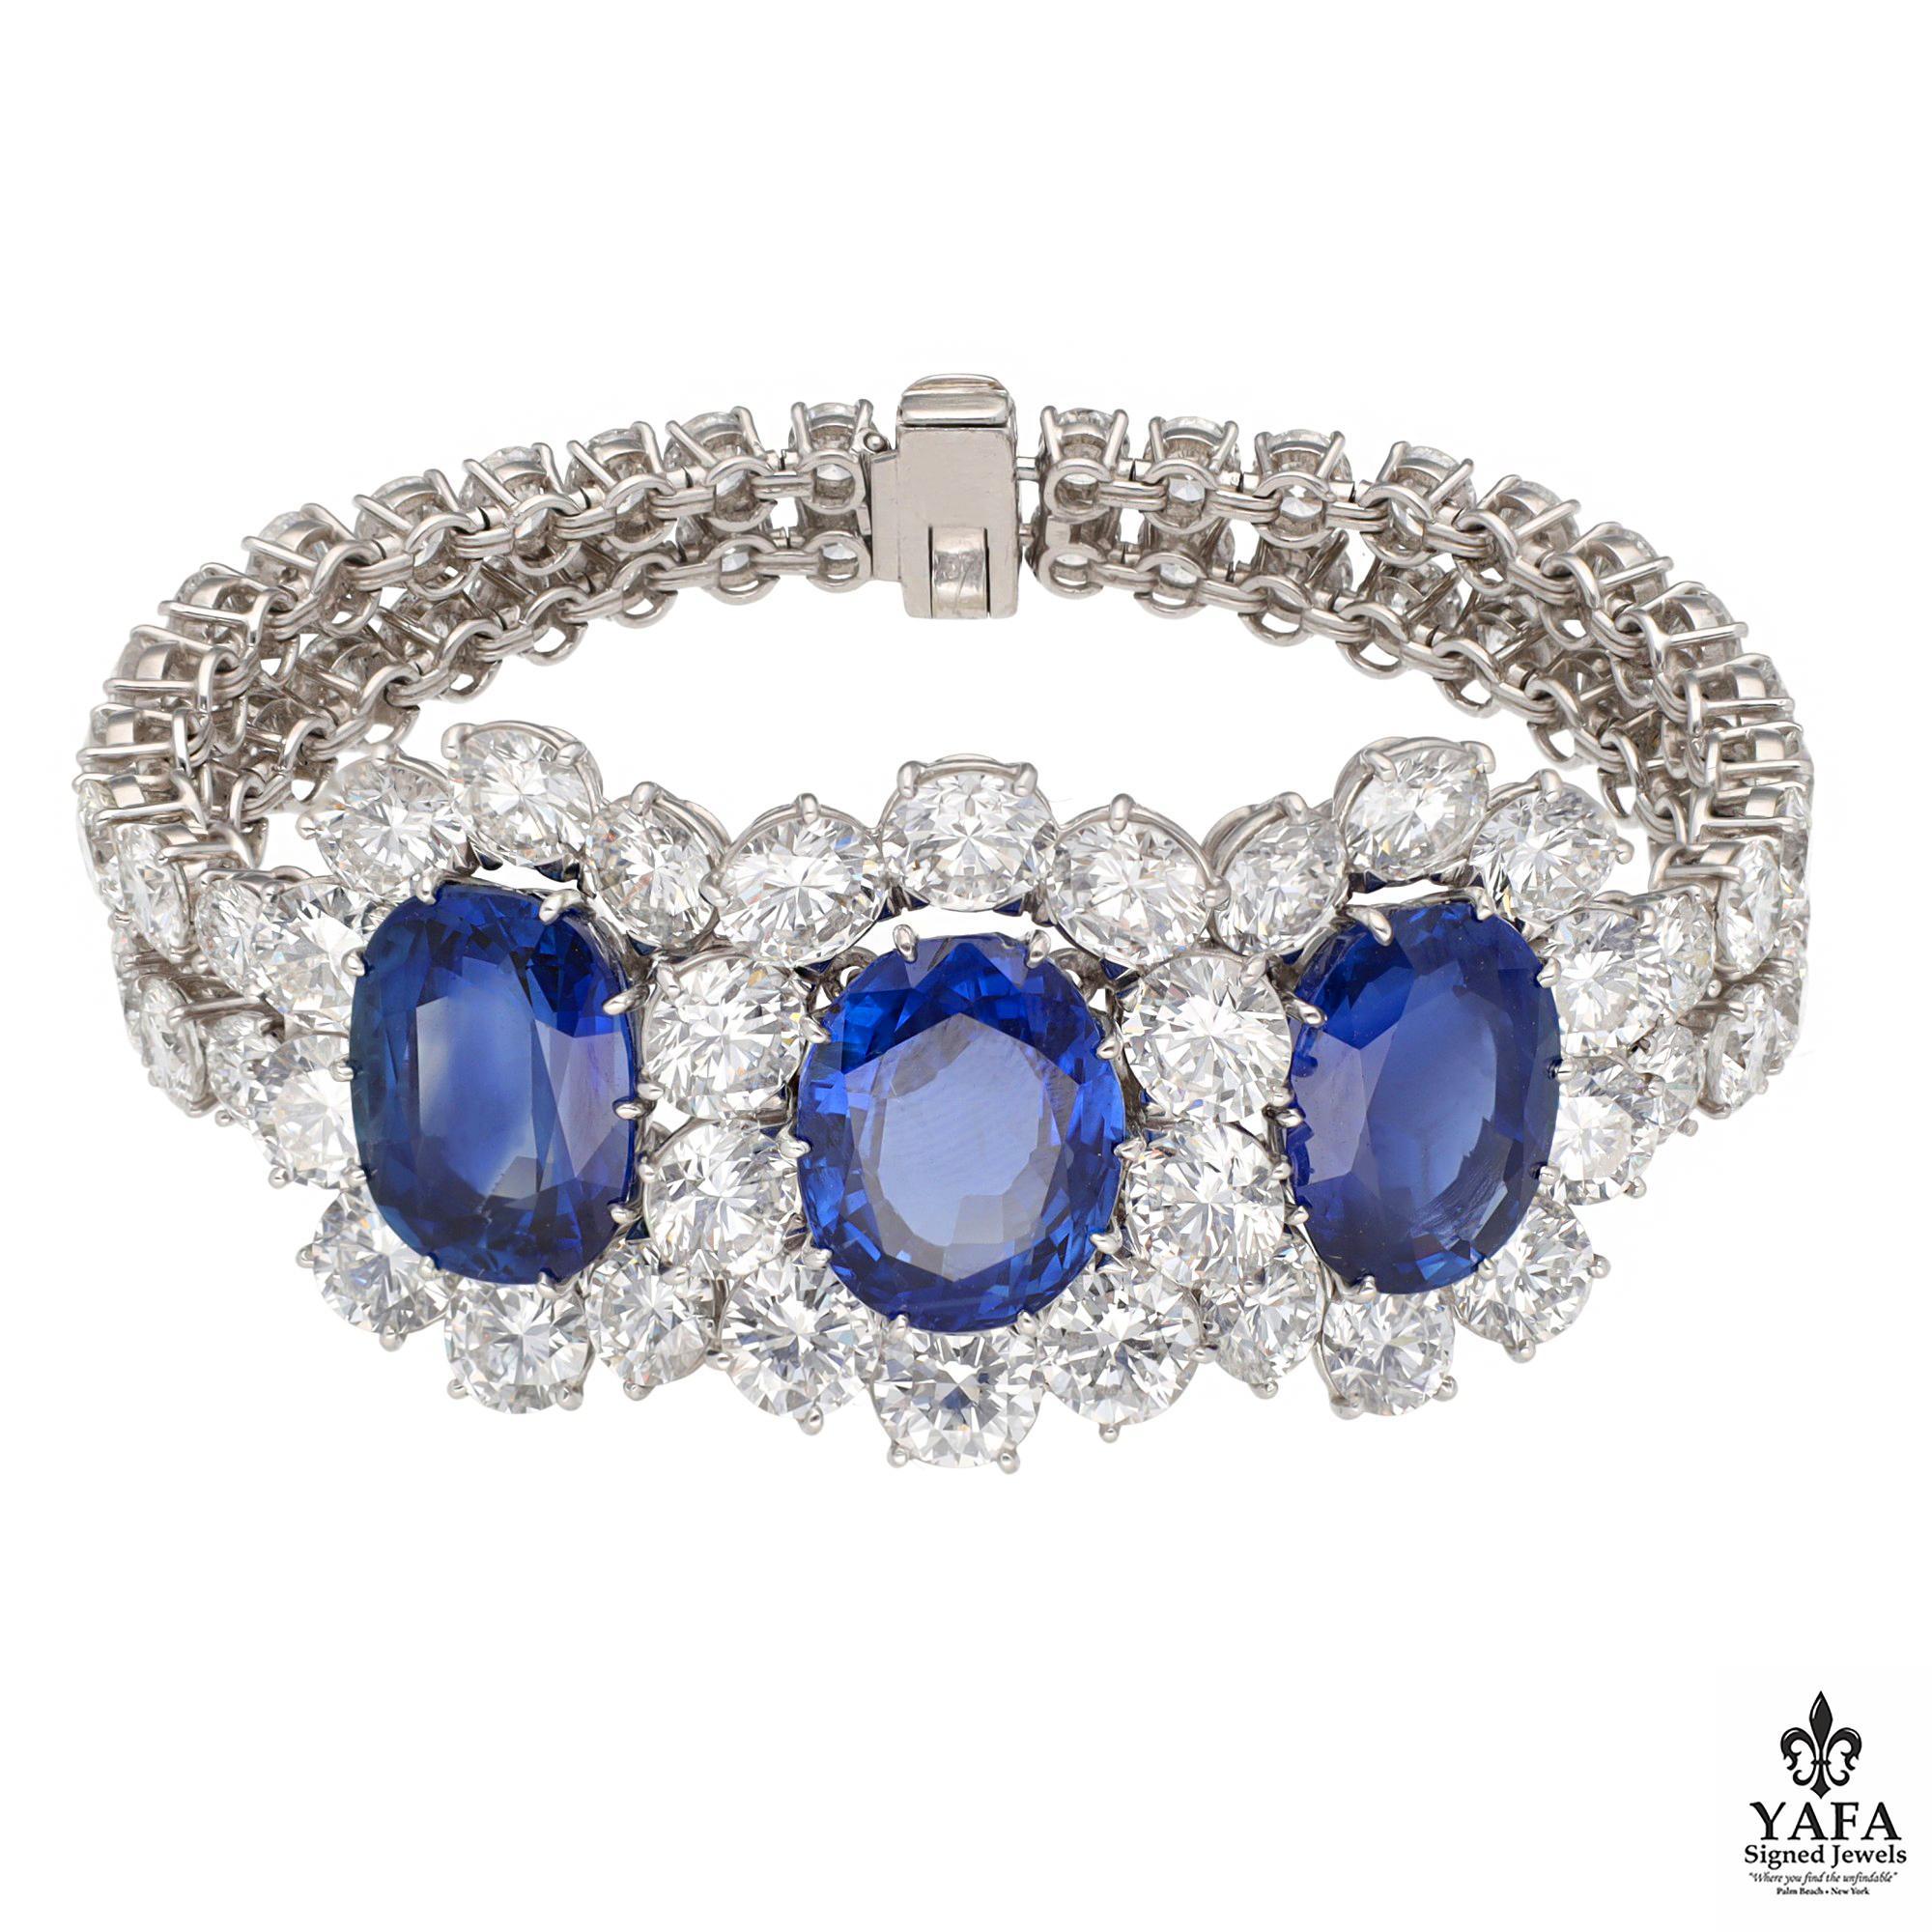 Van Cleef & Arpels Platinum and 18K White Gold No Heart Sapphire and Diamond Bracelet. 3-Oval Shaped Sapphires.

Total Sapphire weight: 35.55 CTS
10.65 CTS-Ceylon no heat
11.54 CTS
13.33 CTS-Burma no heat
SSEF Guebelin Certificate
Approximate Length